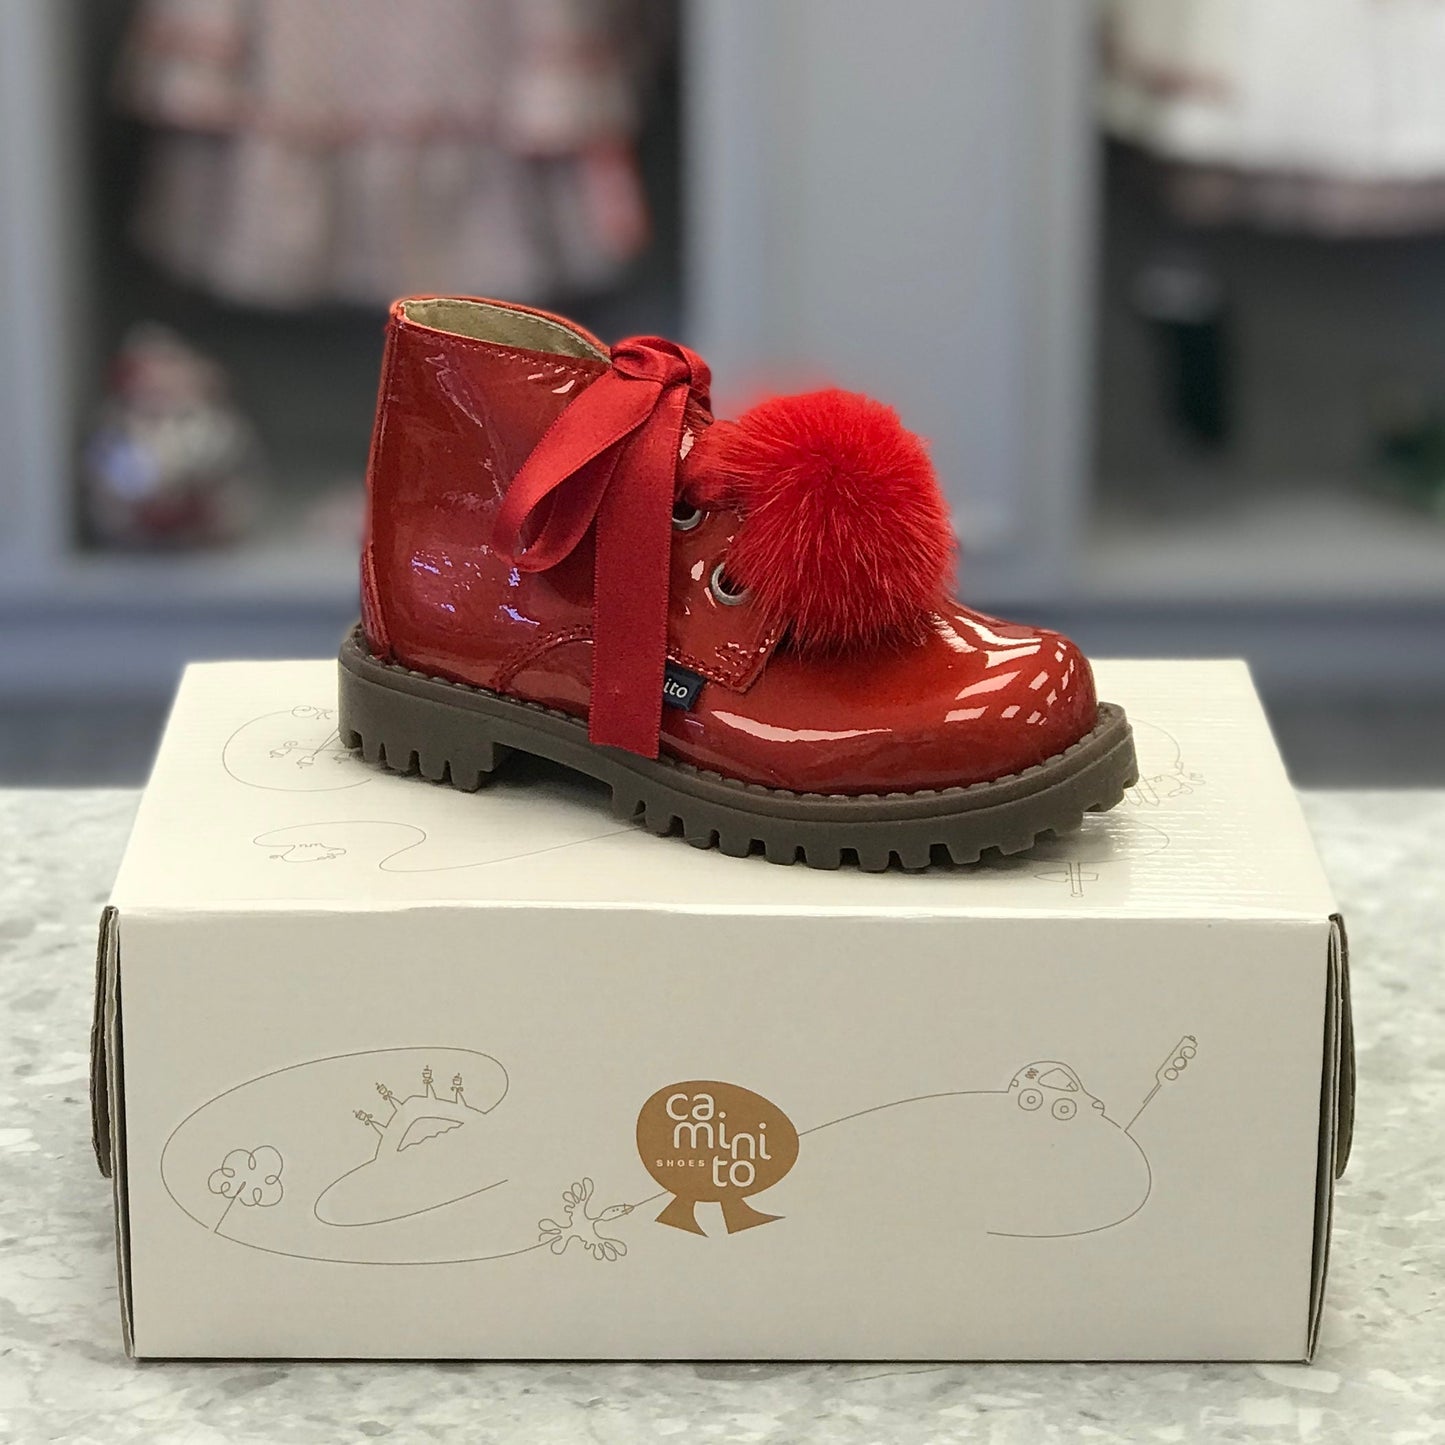 CAMINITO Red Patent Leather Pom Pom Boots